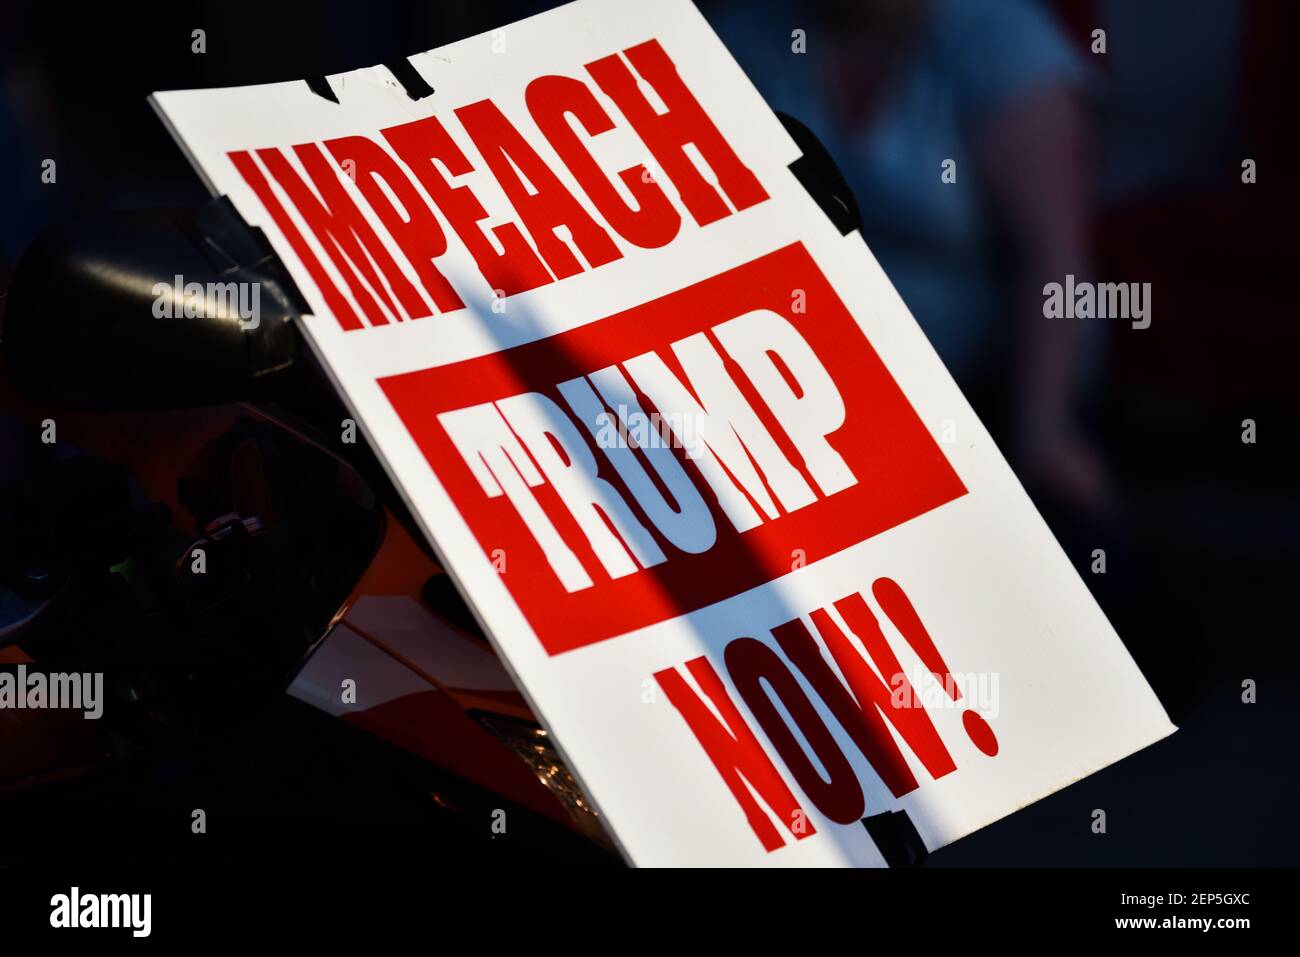 Impeach Trump Now signs indicates displeasure with Donald Trump, July 4th parade, Montpelier, VT, USA. Stock Photo